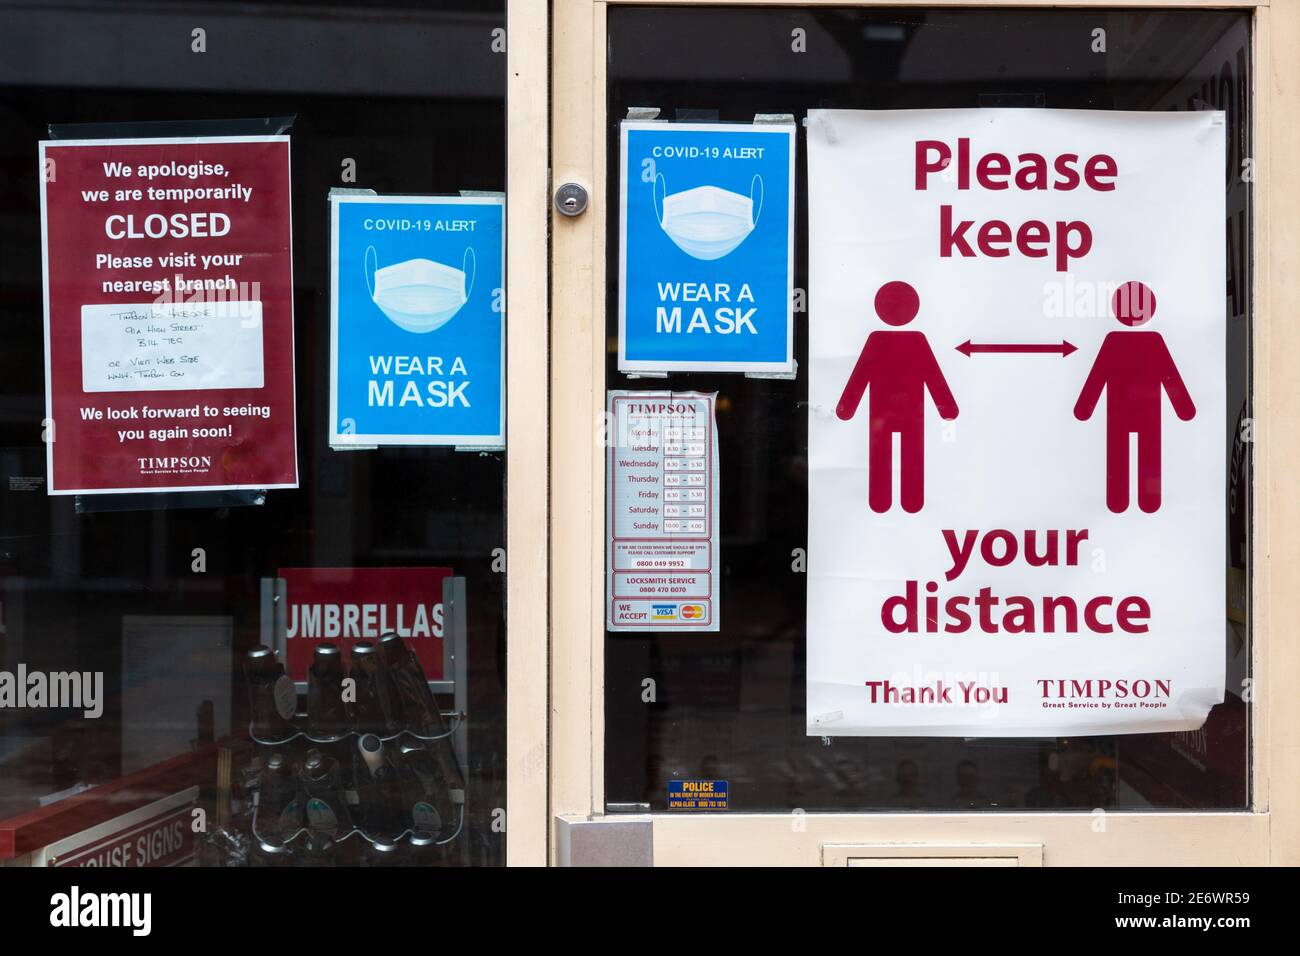 Timpson shop door with covid safety signs, UK 2021 Stock Photo